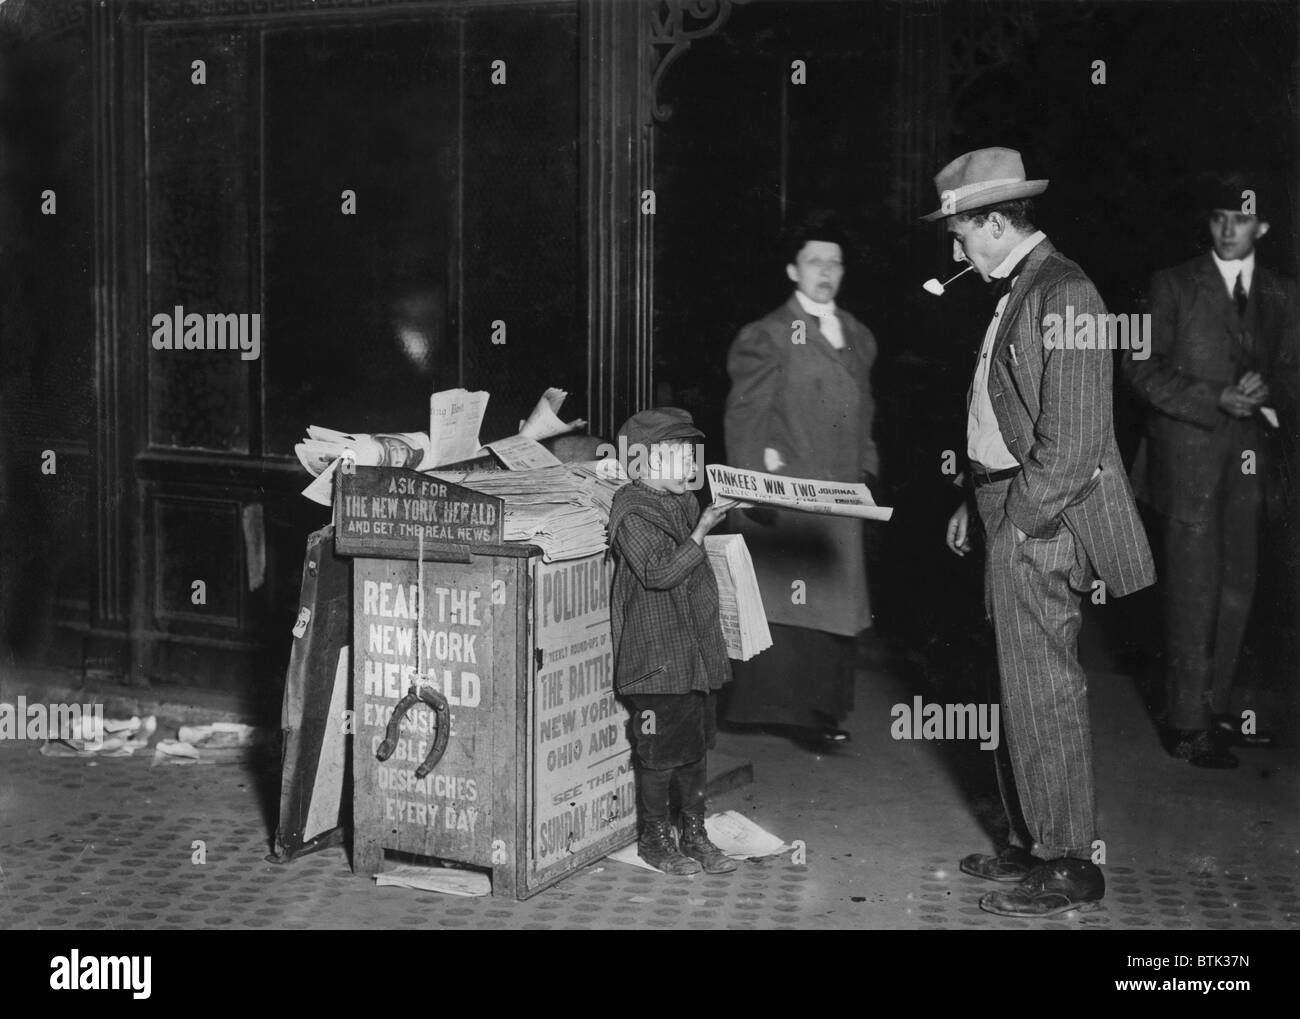 Child labor, Jerald Schaitberger of 416 W. 57th Street, who helps an older boy sell papers until 10 P.M. on Columbus Circle. 7 years old. 9:30 P.M., the newspaper announces the 'Yankees win', New York City, photograph by Lewis Wickes Hine, October 8, 1910 Stock Photo